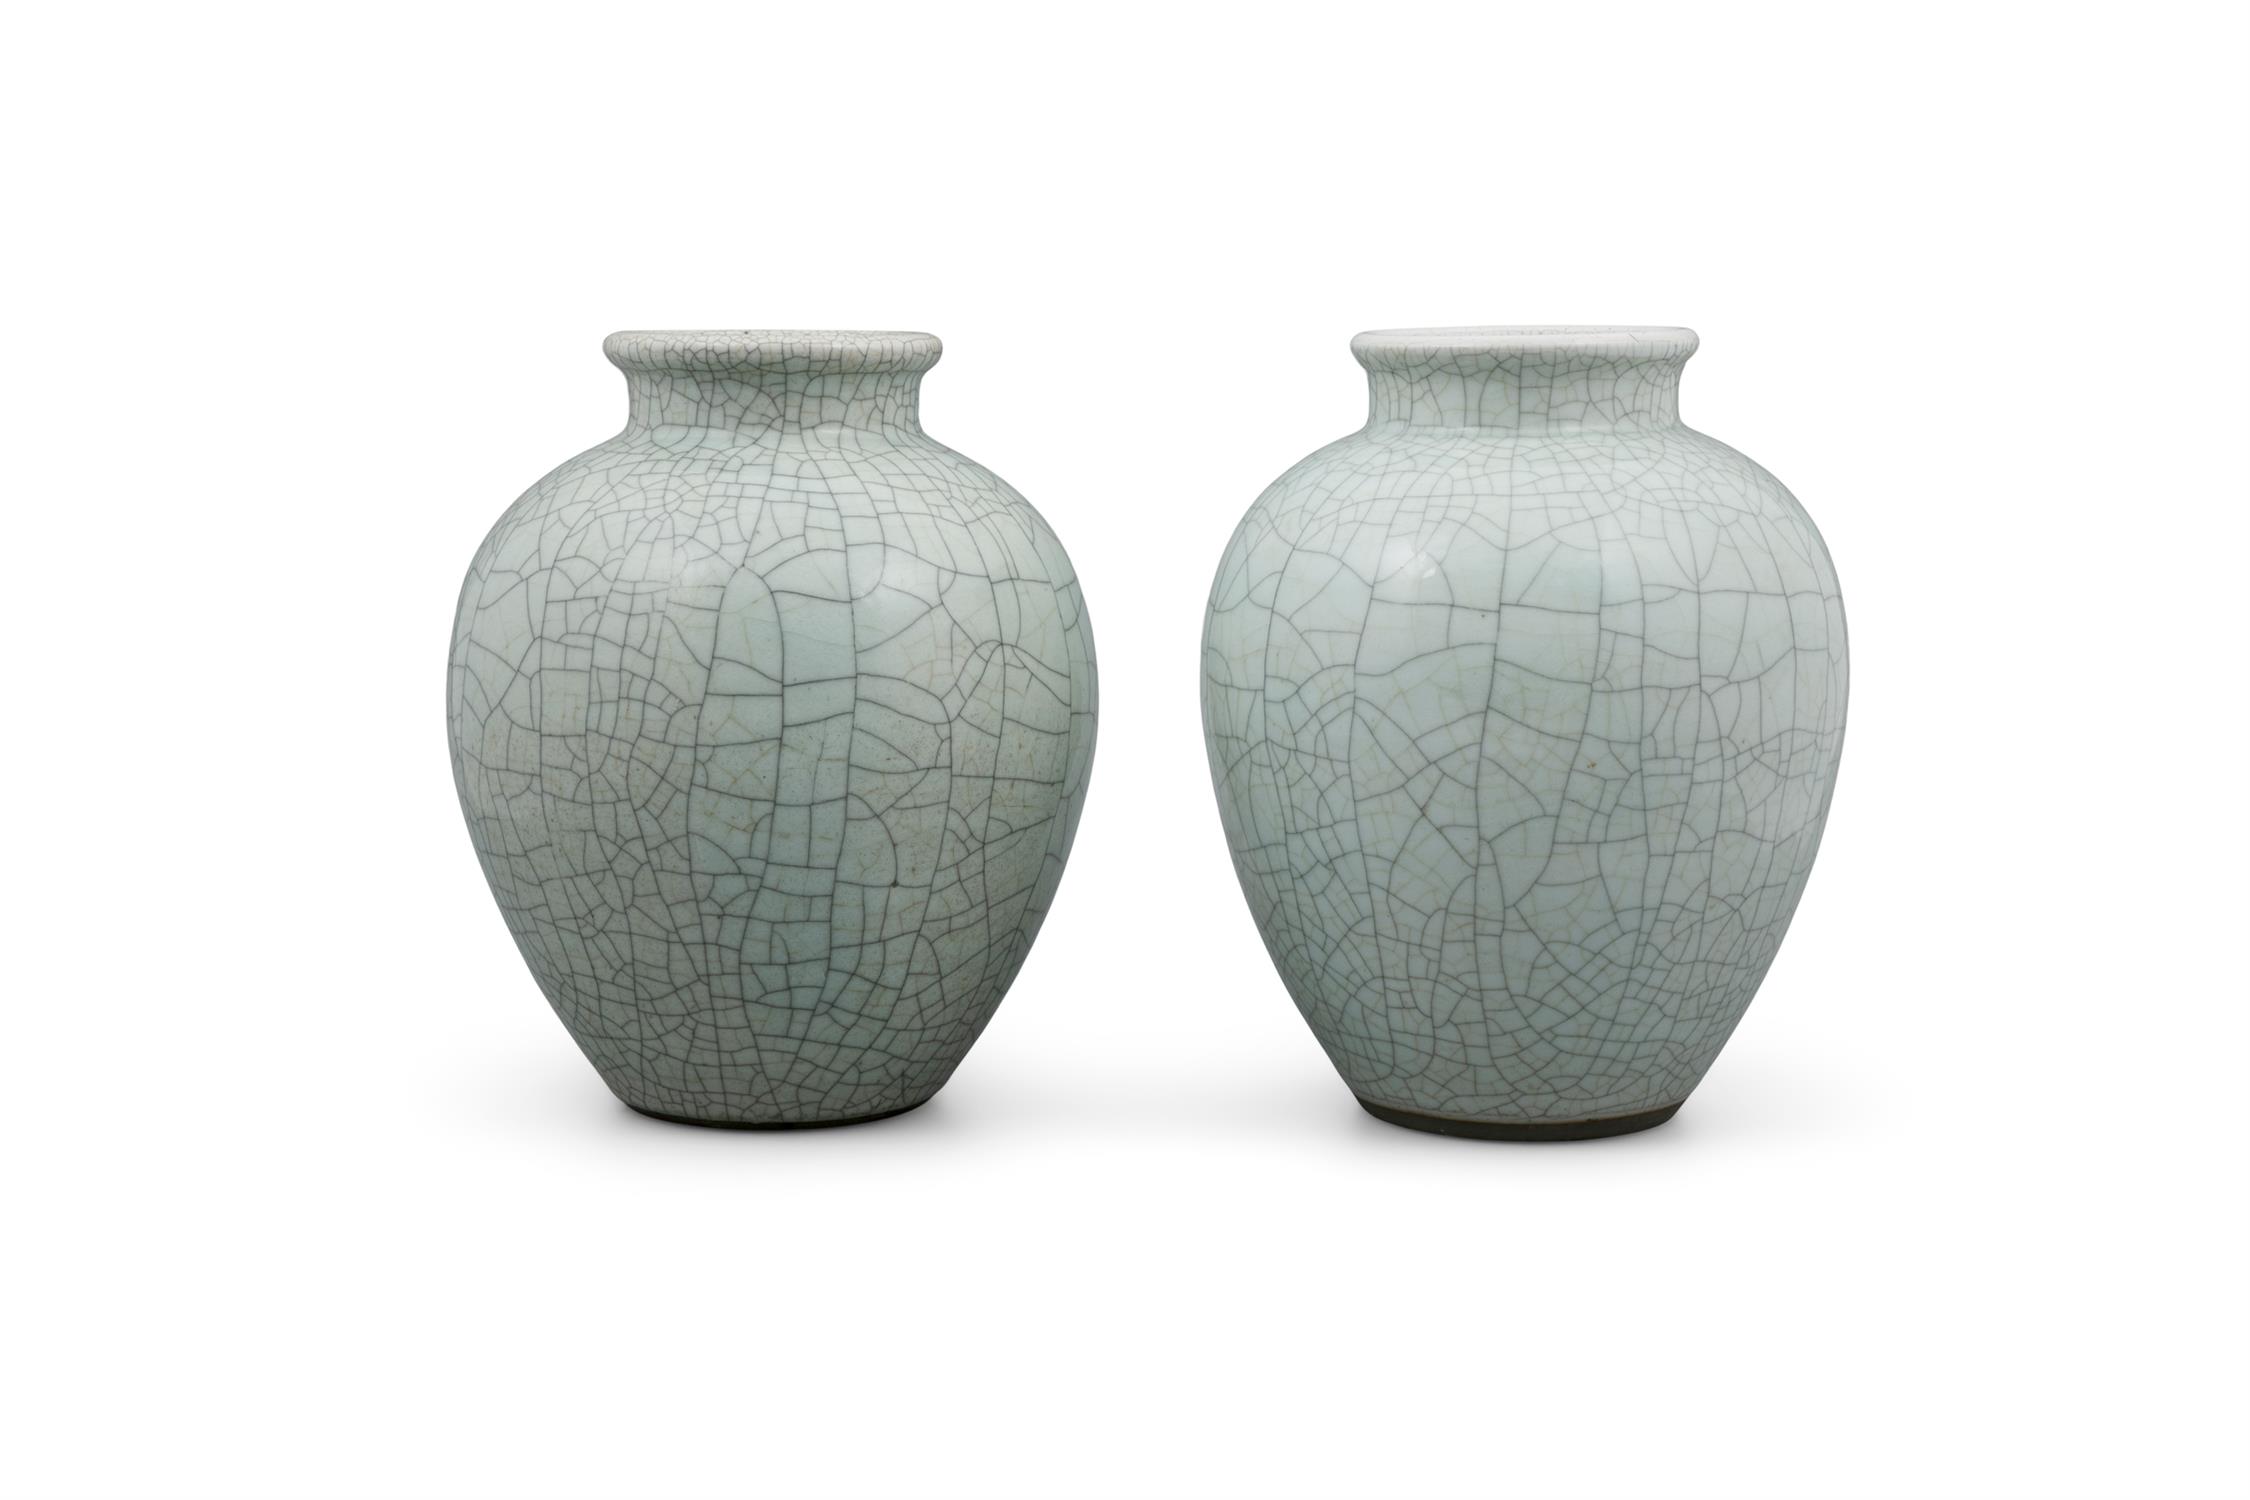 A PAIR OF GE OR GEYAO TYPE CRACKLED CELADON GLAZED PORCELAIN JARS CHINA, LATE QING DYNASTY TO